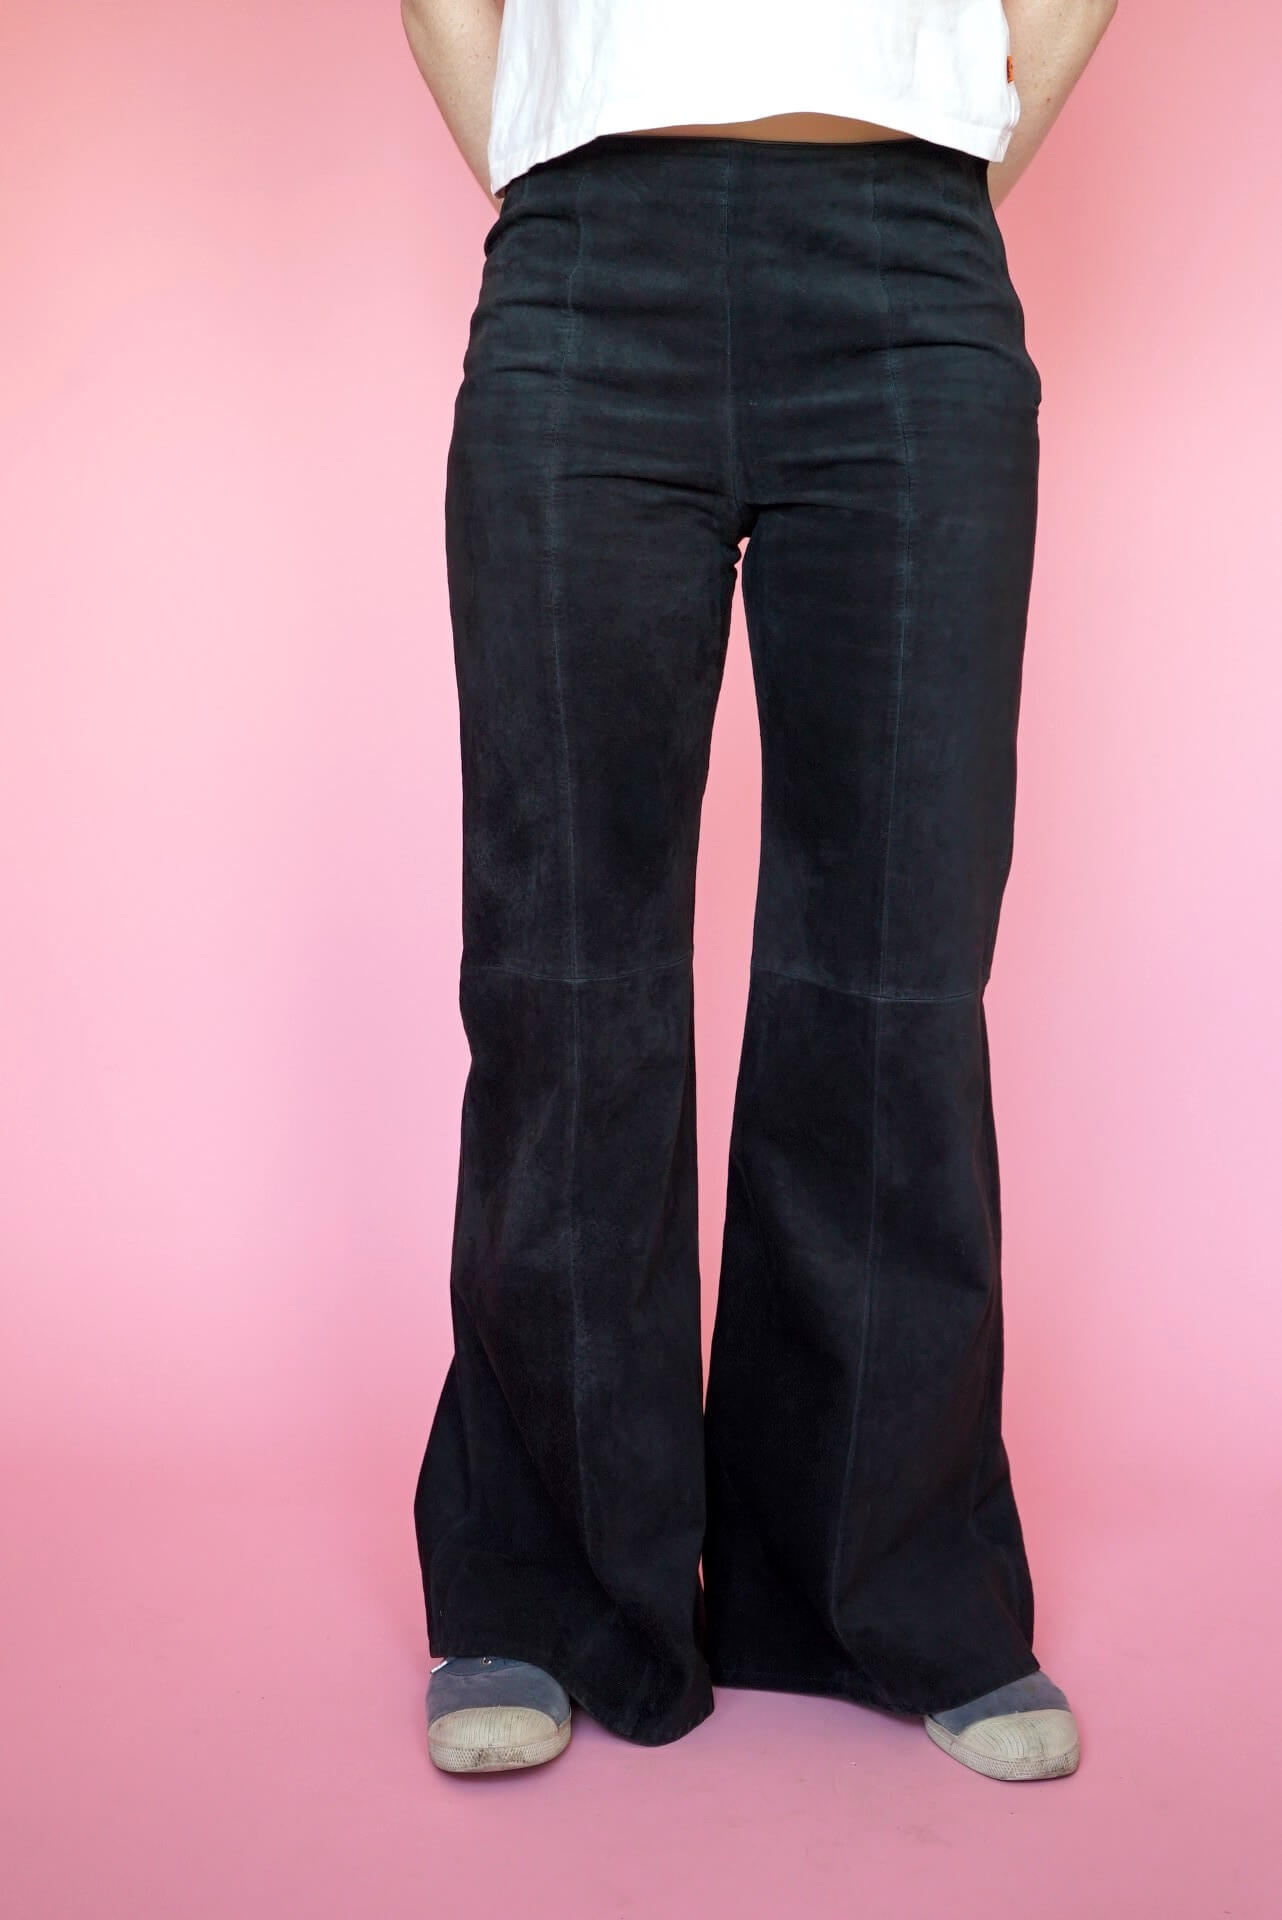 Vintage Black Suede Leather Flared Trousers Size 10